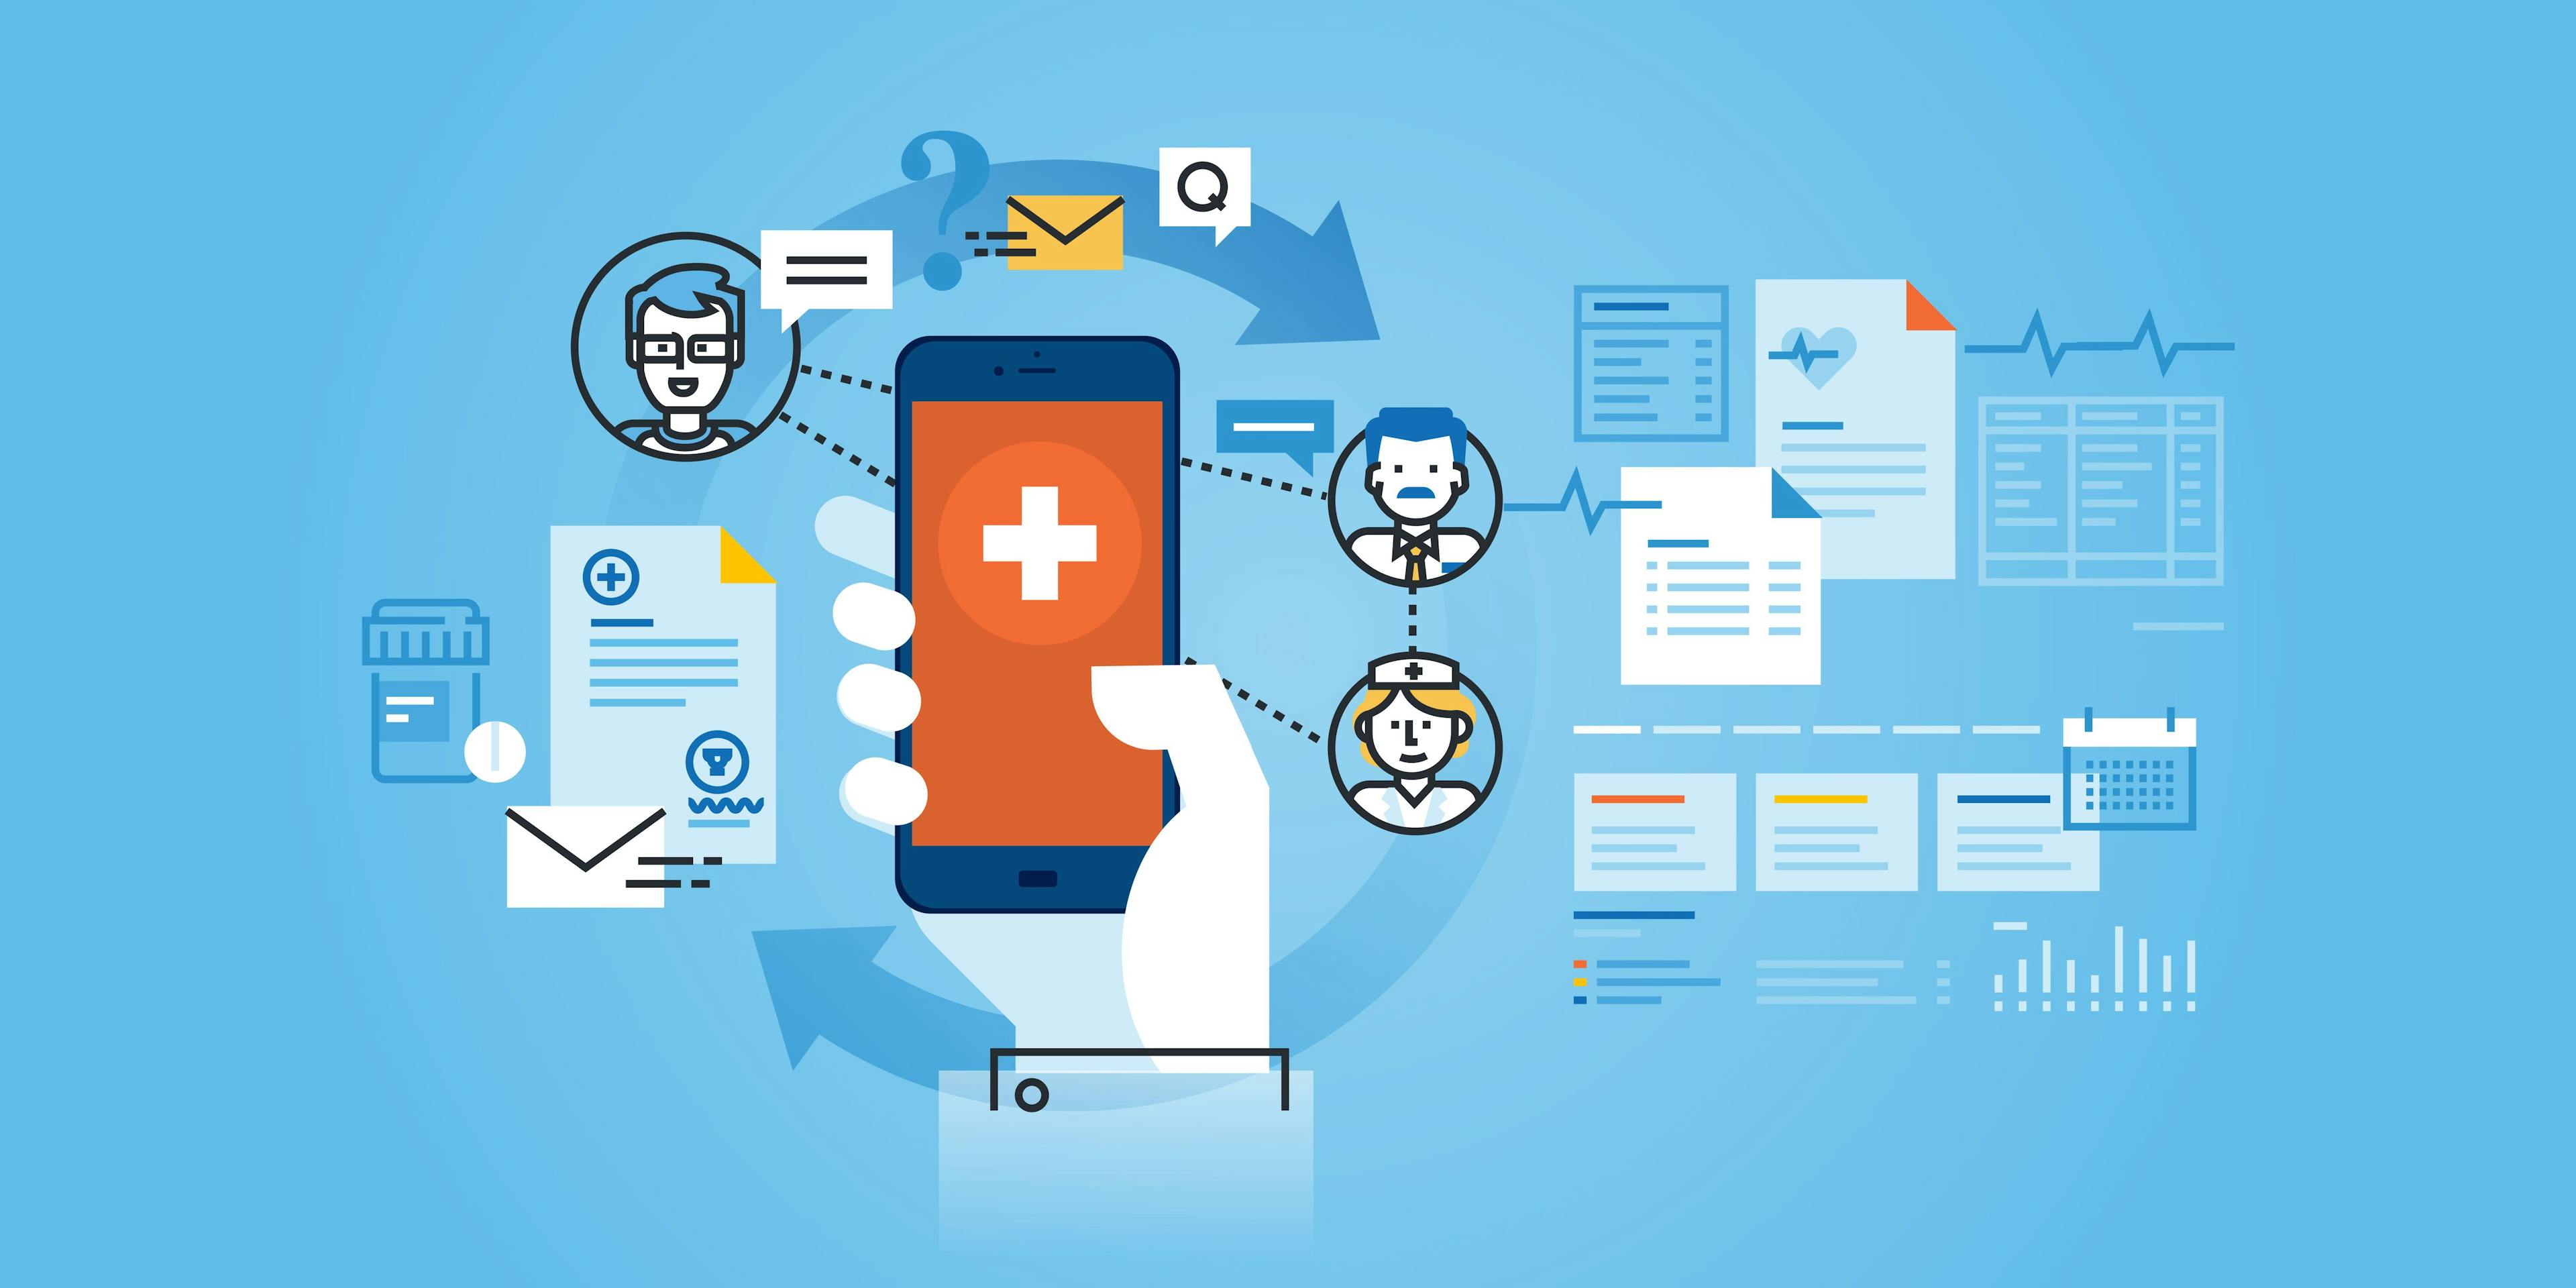 Where does healthcare communication stand in 2021?